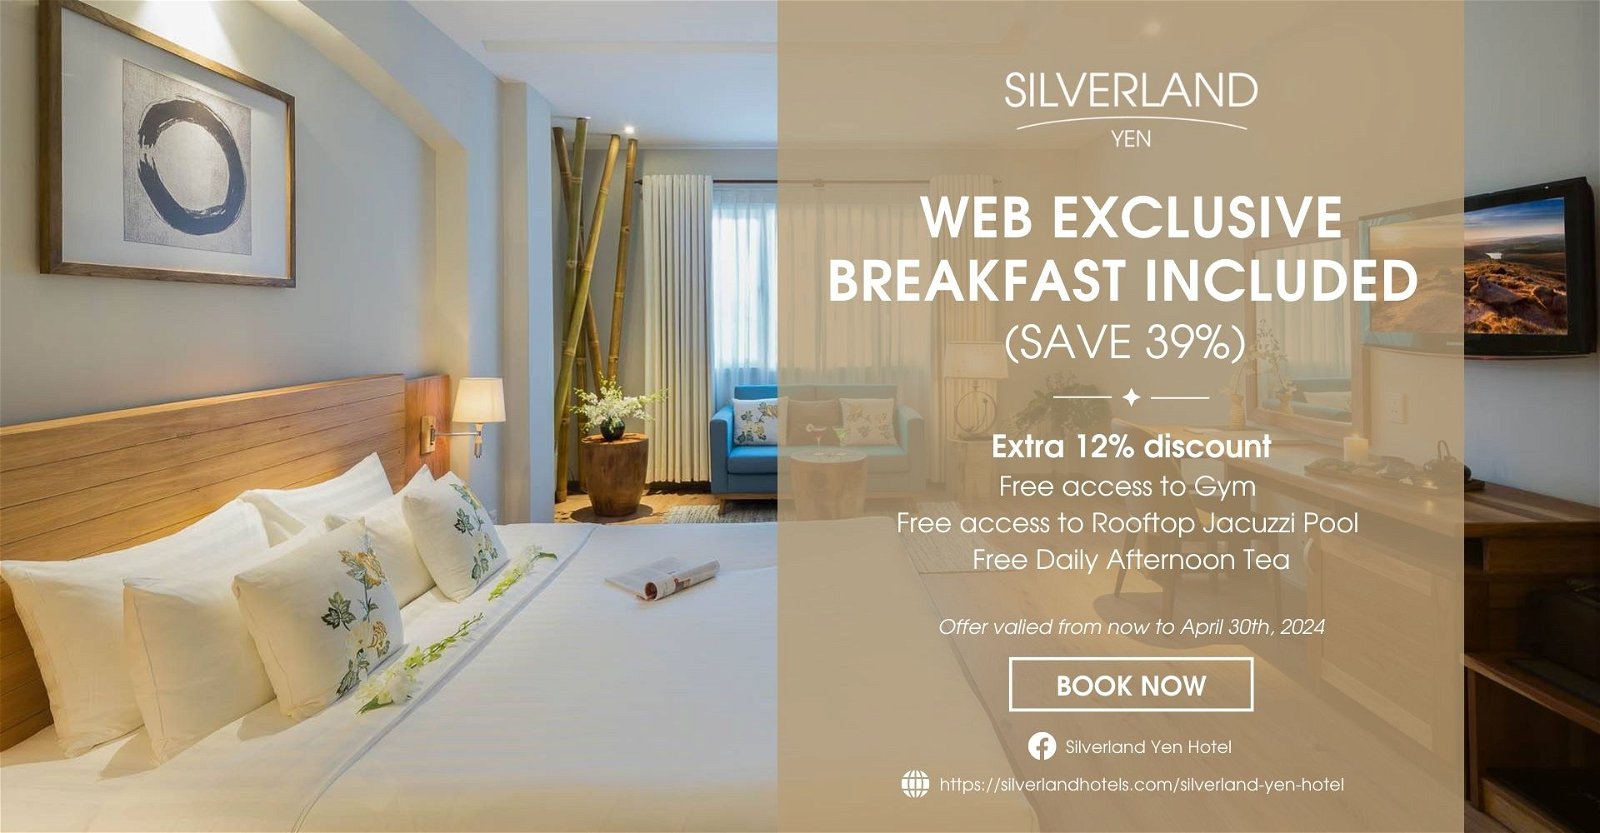 SILVERLAND YEN – WEB EXCLUSIVE – BREAKFAST INCLUDED (SAVE 39%)